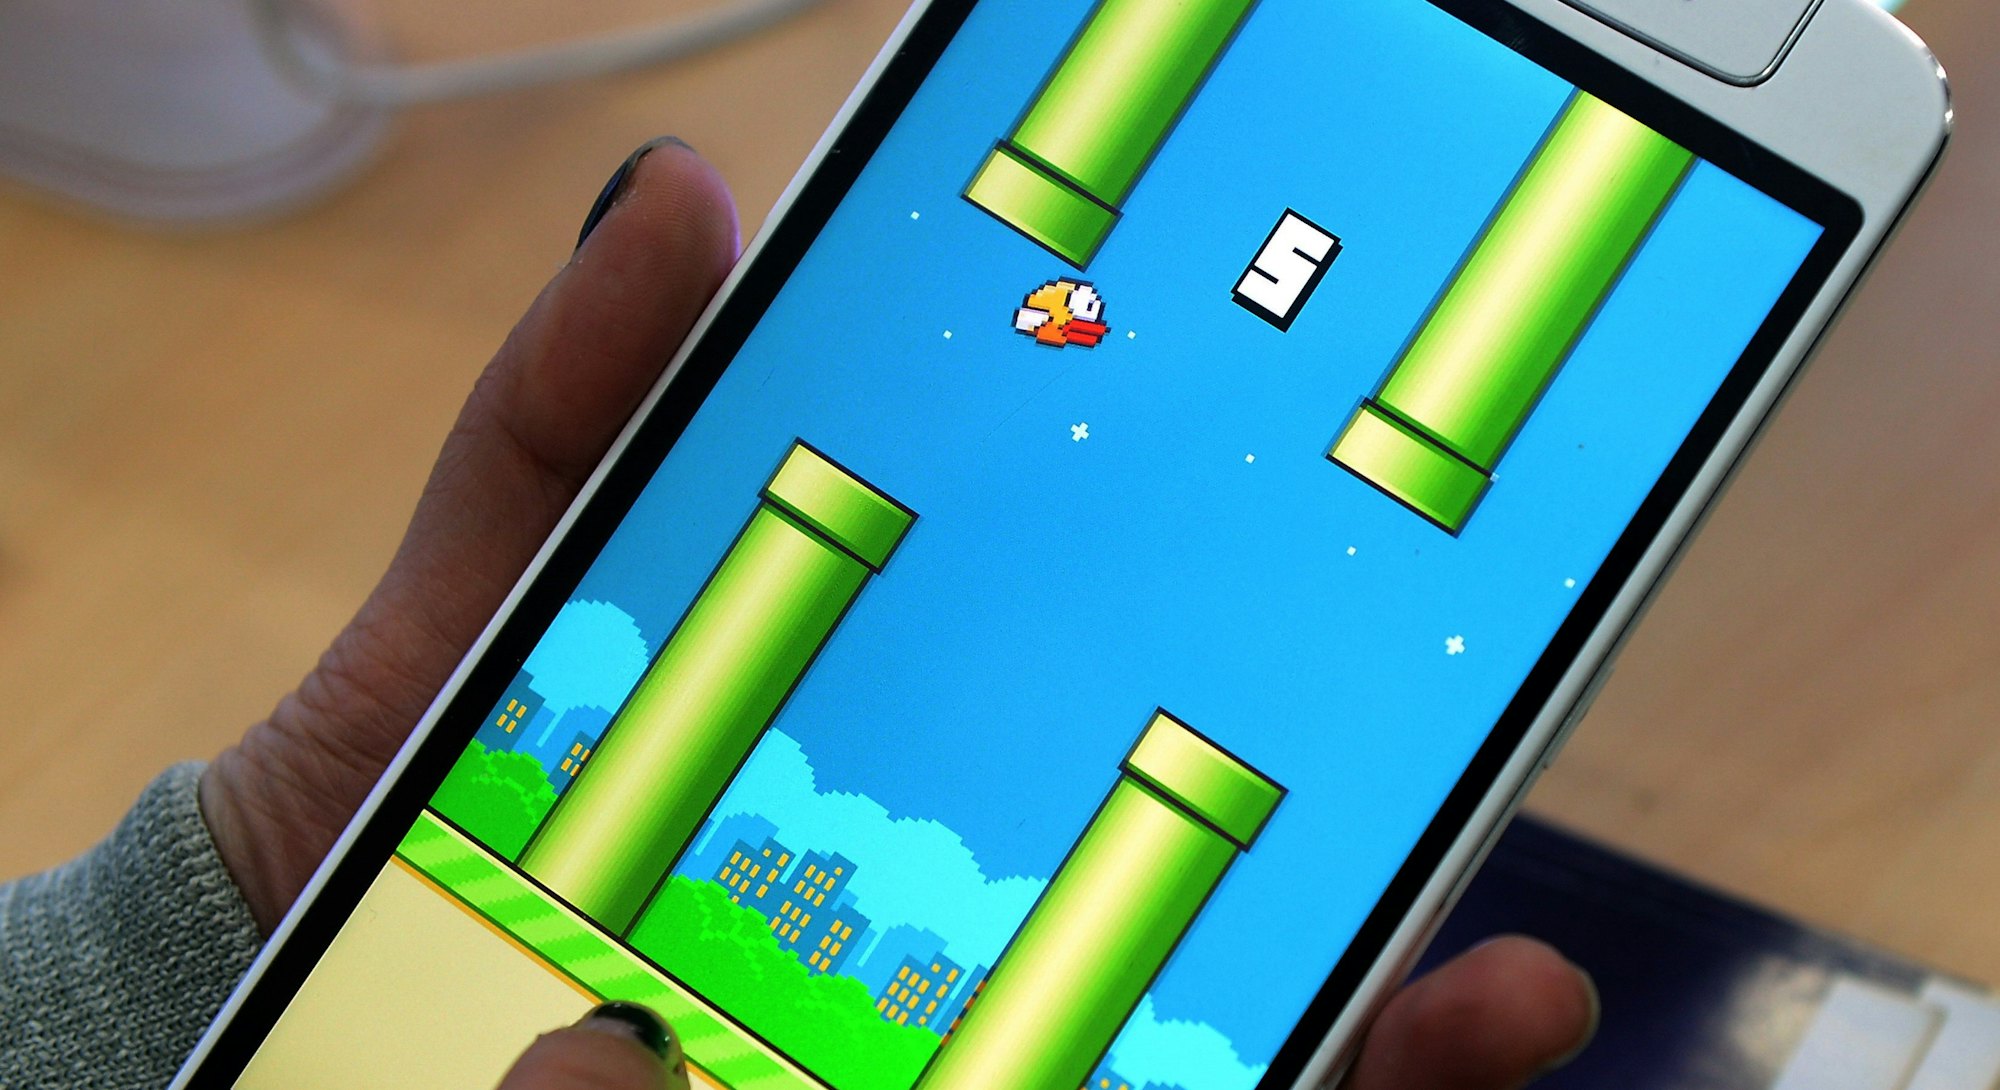 It's been 10 years since Flappy Bird and other nostalgic apps made their debut.